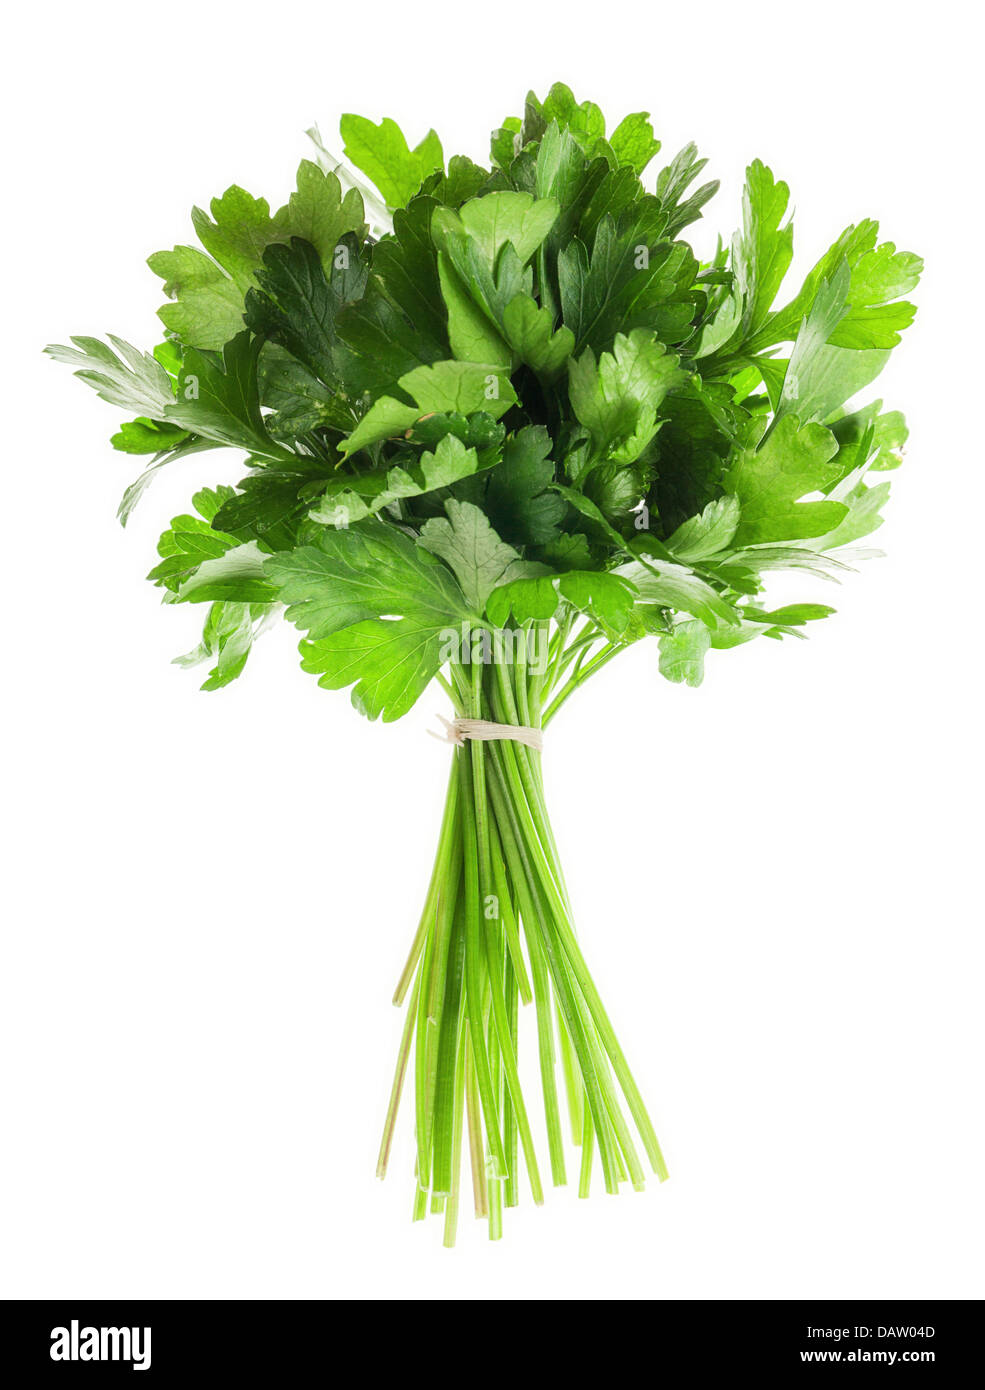 Bunch of fresh parsley isolated over white background Stock Photo